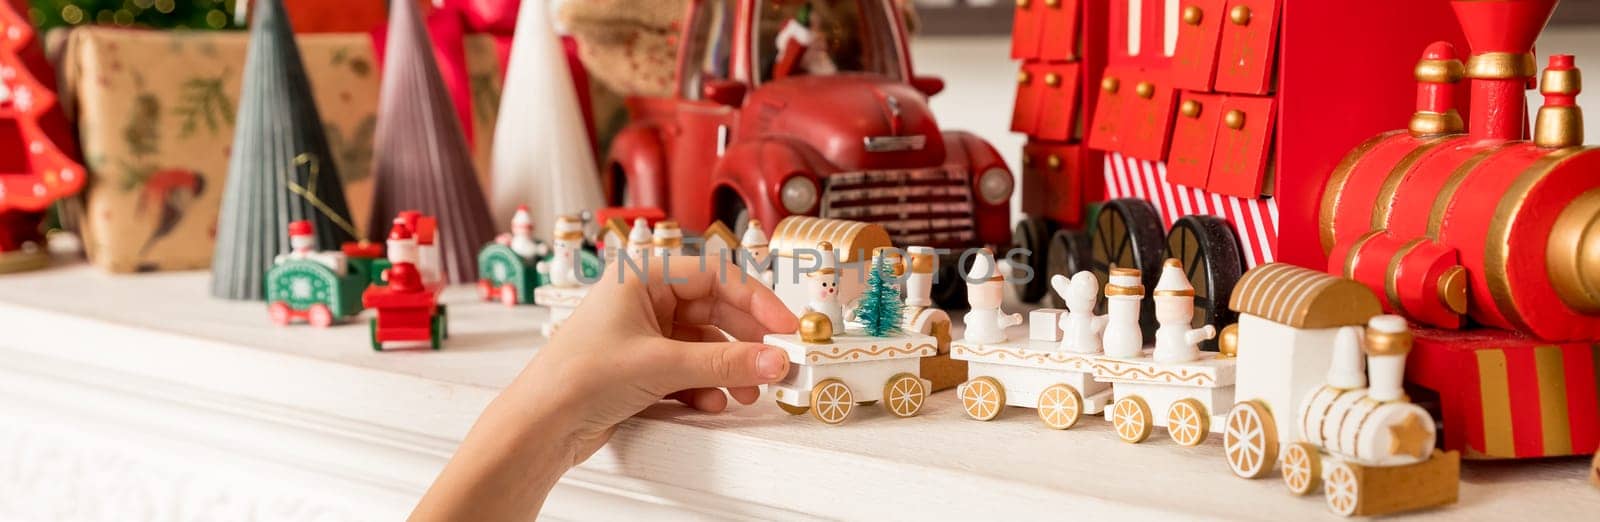 Hands of a child holding a gift, A wooden train toy is carrying New Year's gifts. Cozy home New Year atmosphere.wooden vintage train. web banner by YuliaYaspe1979